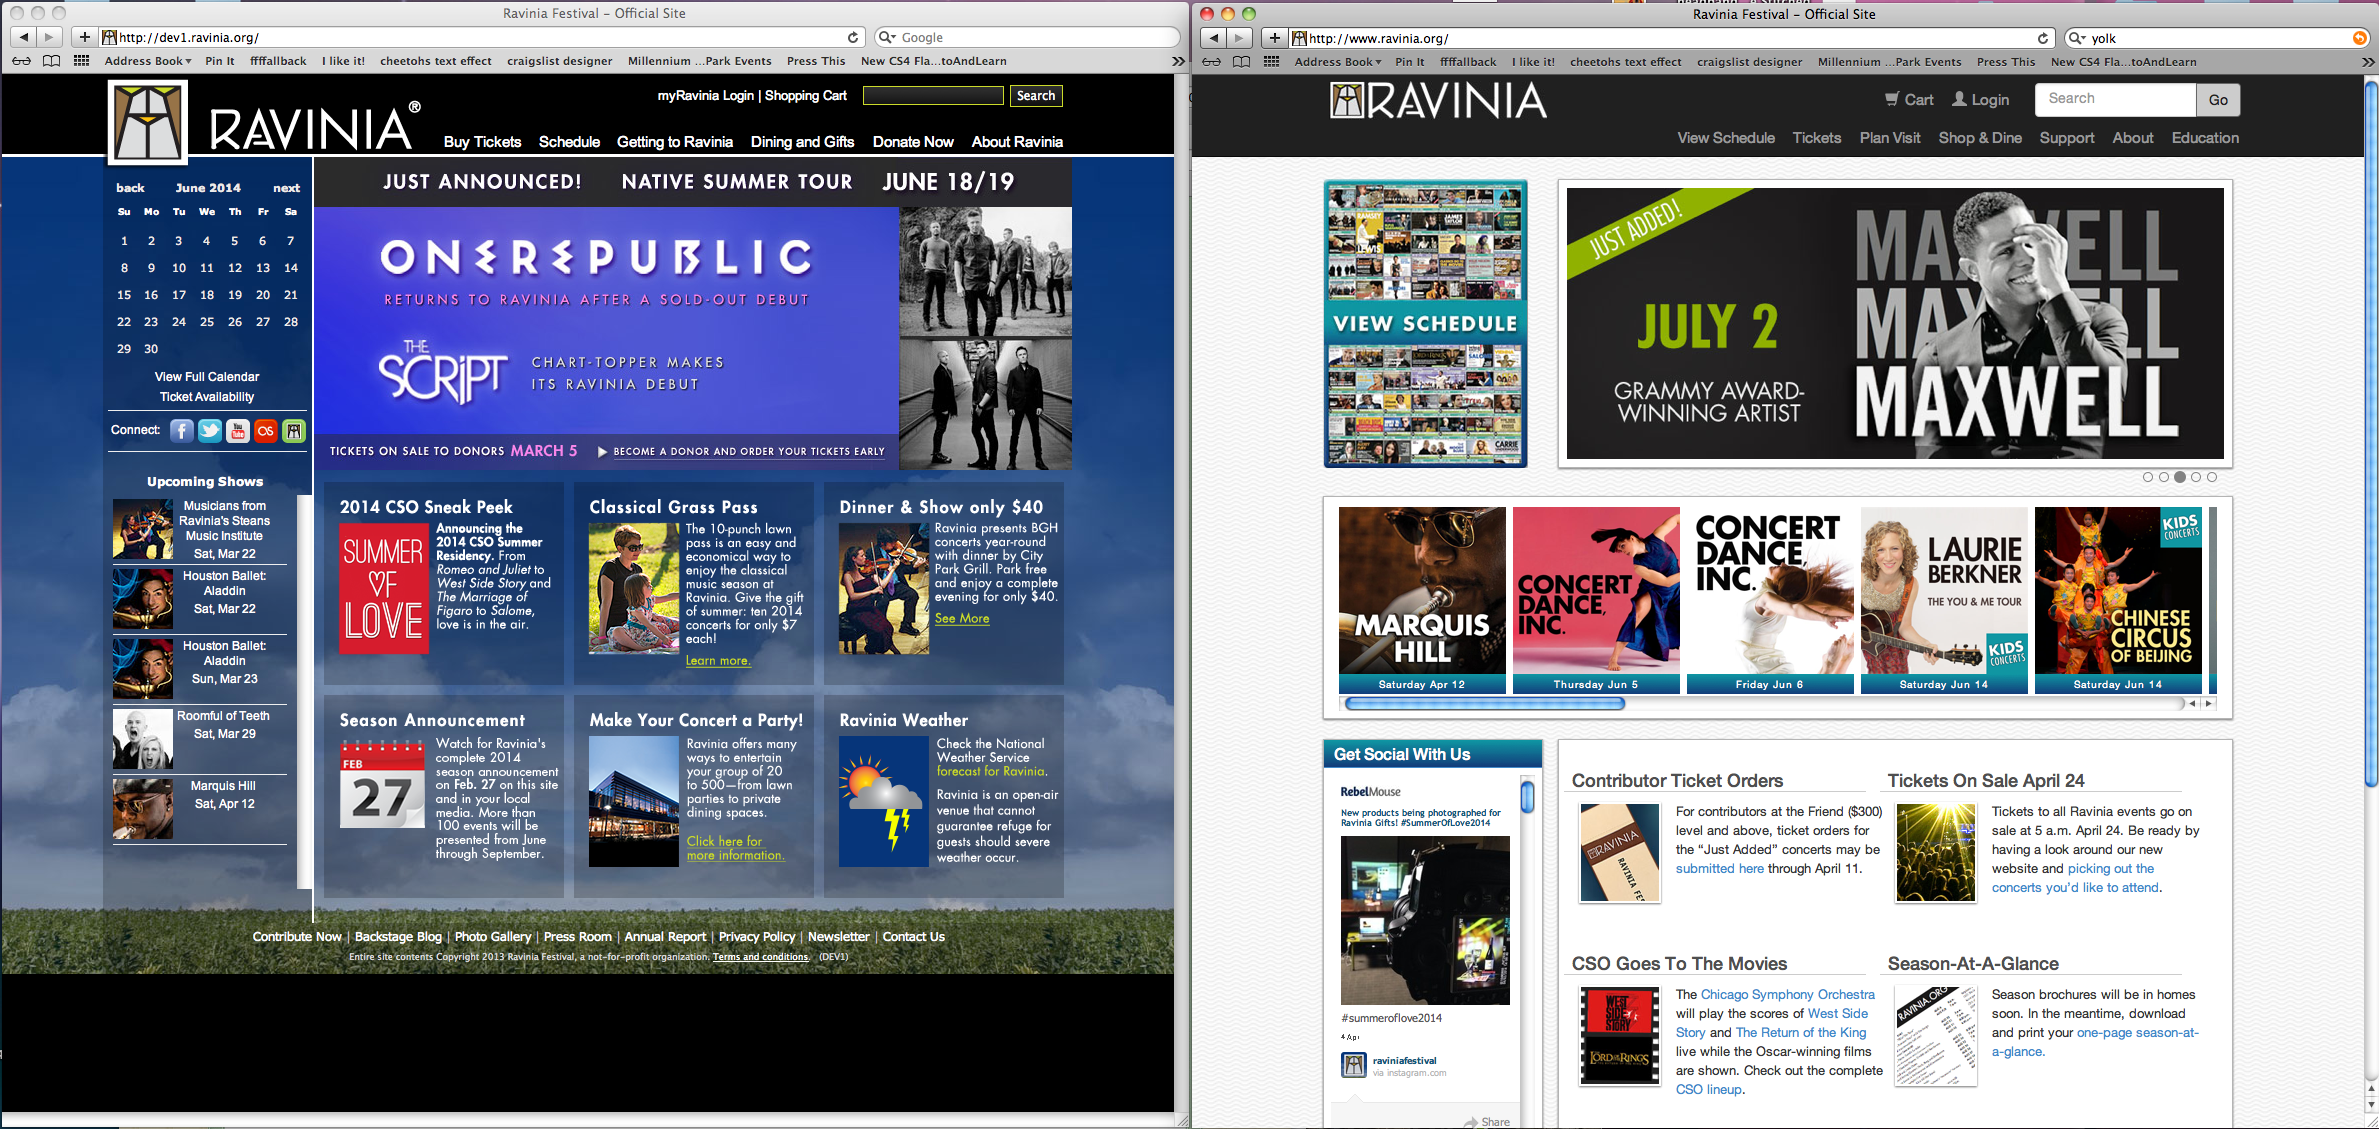 Side by side comparison on the Ravinia.org website in 2013 vs 2014 after my redesign